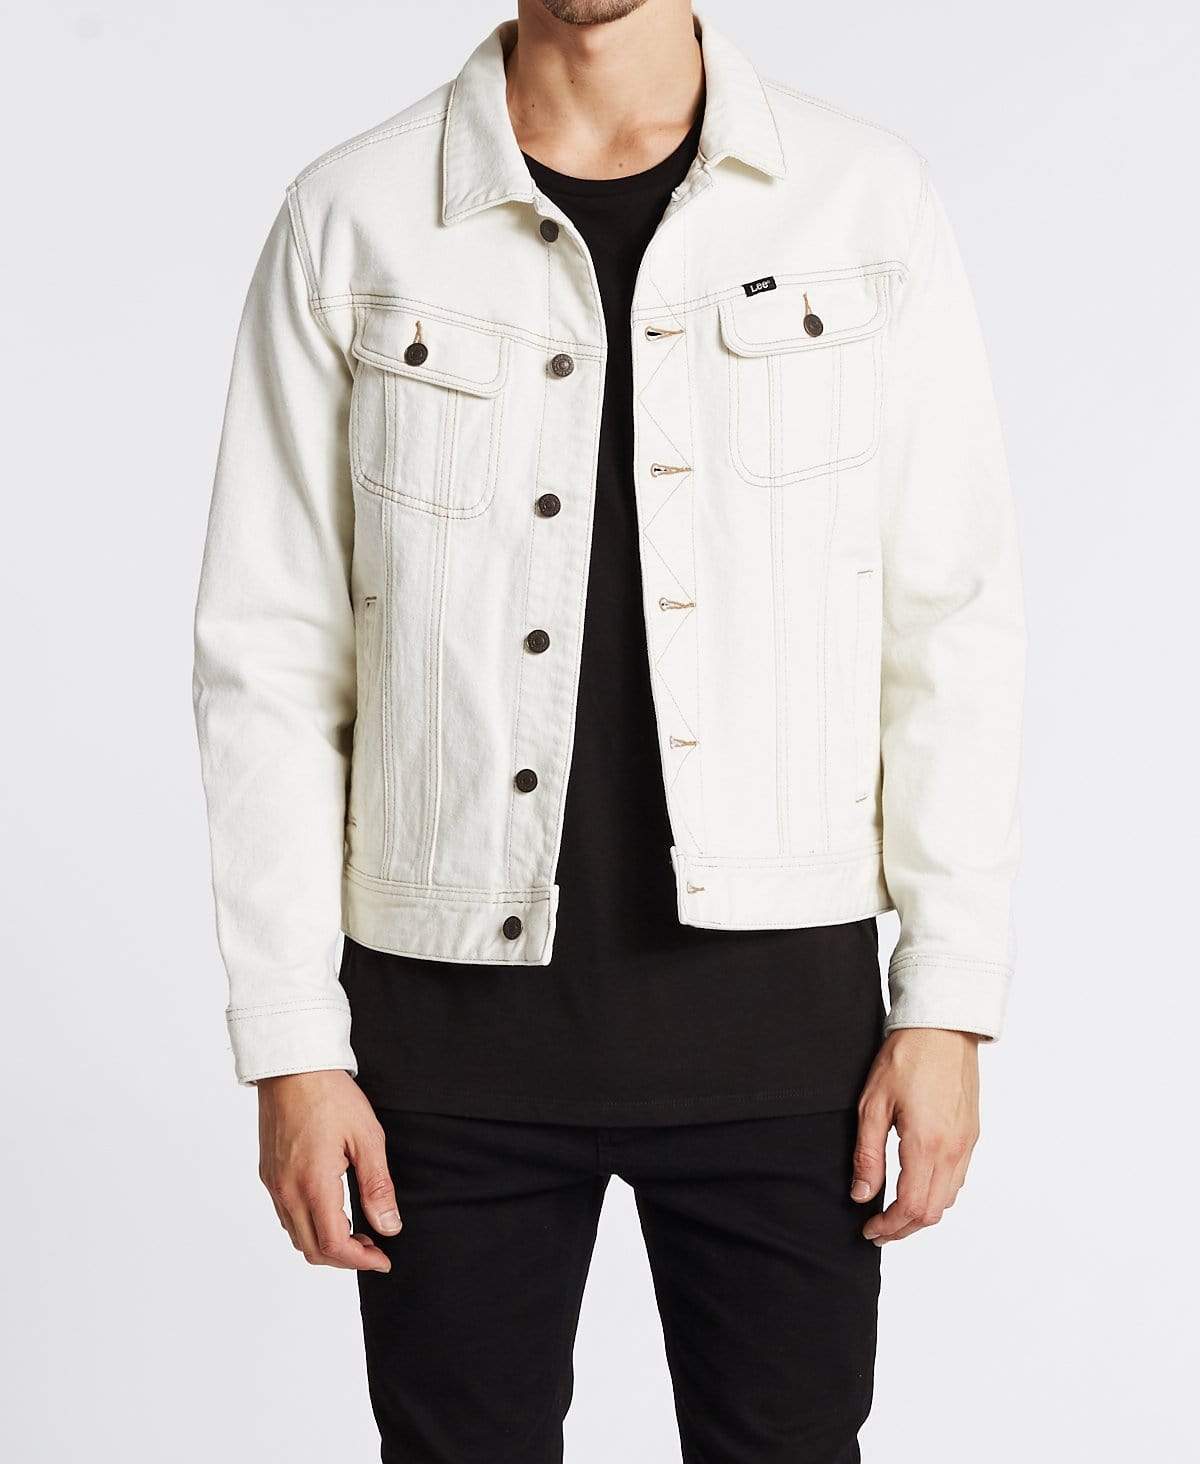 Lee X Daydreamer Chore Coat | Urban Outfitters Singapore - Clothing, Music,  Home & Accessories